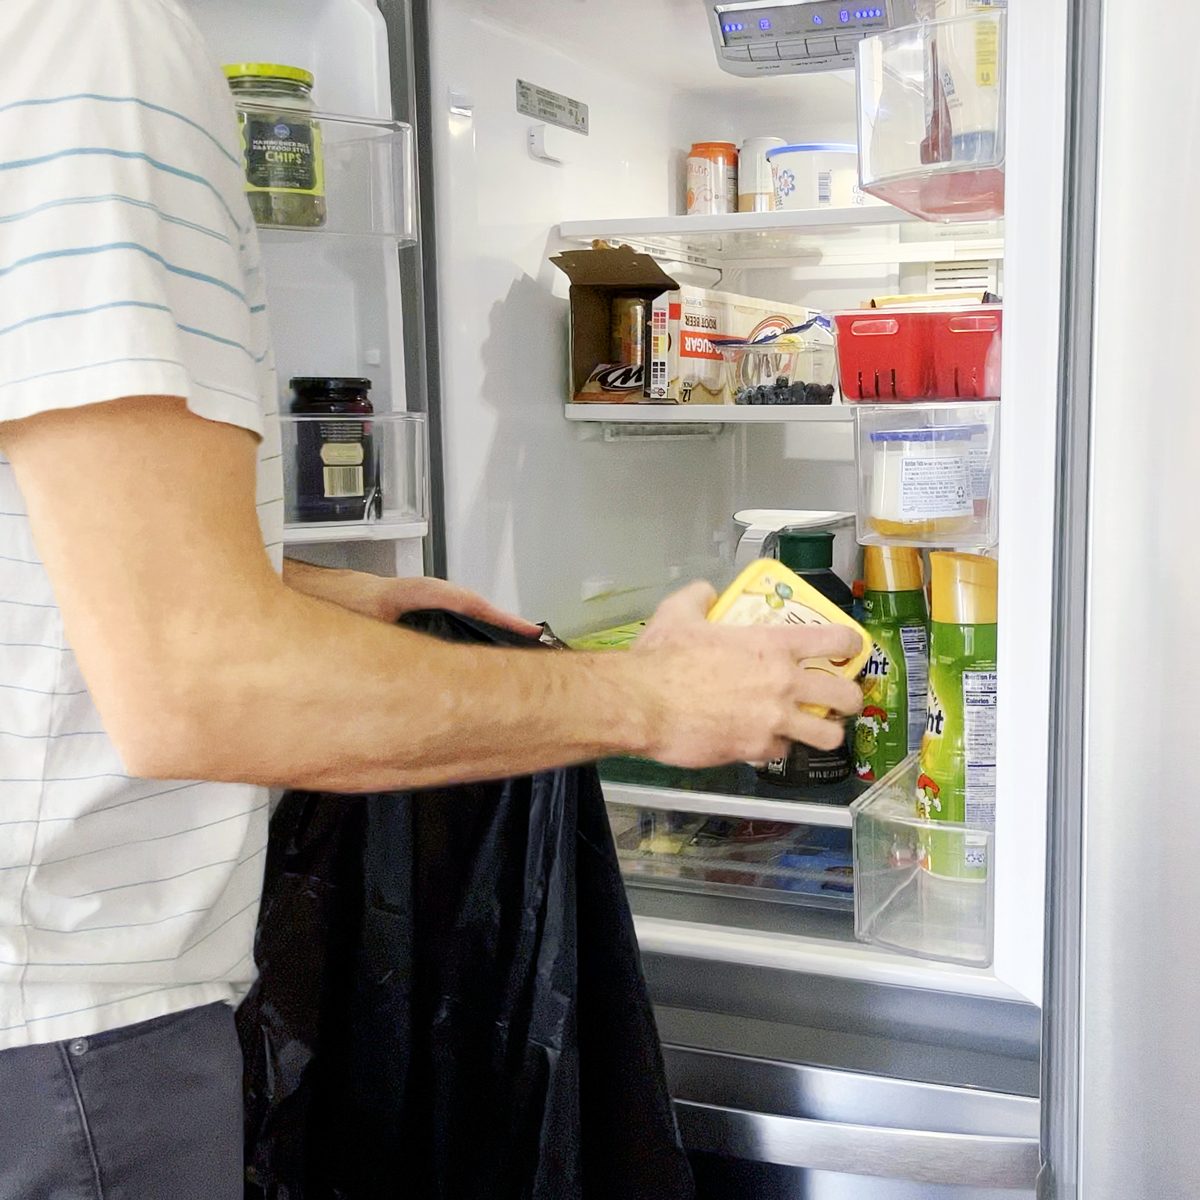 How To Clean a Refrigerator